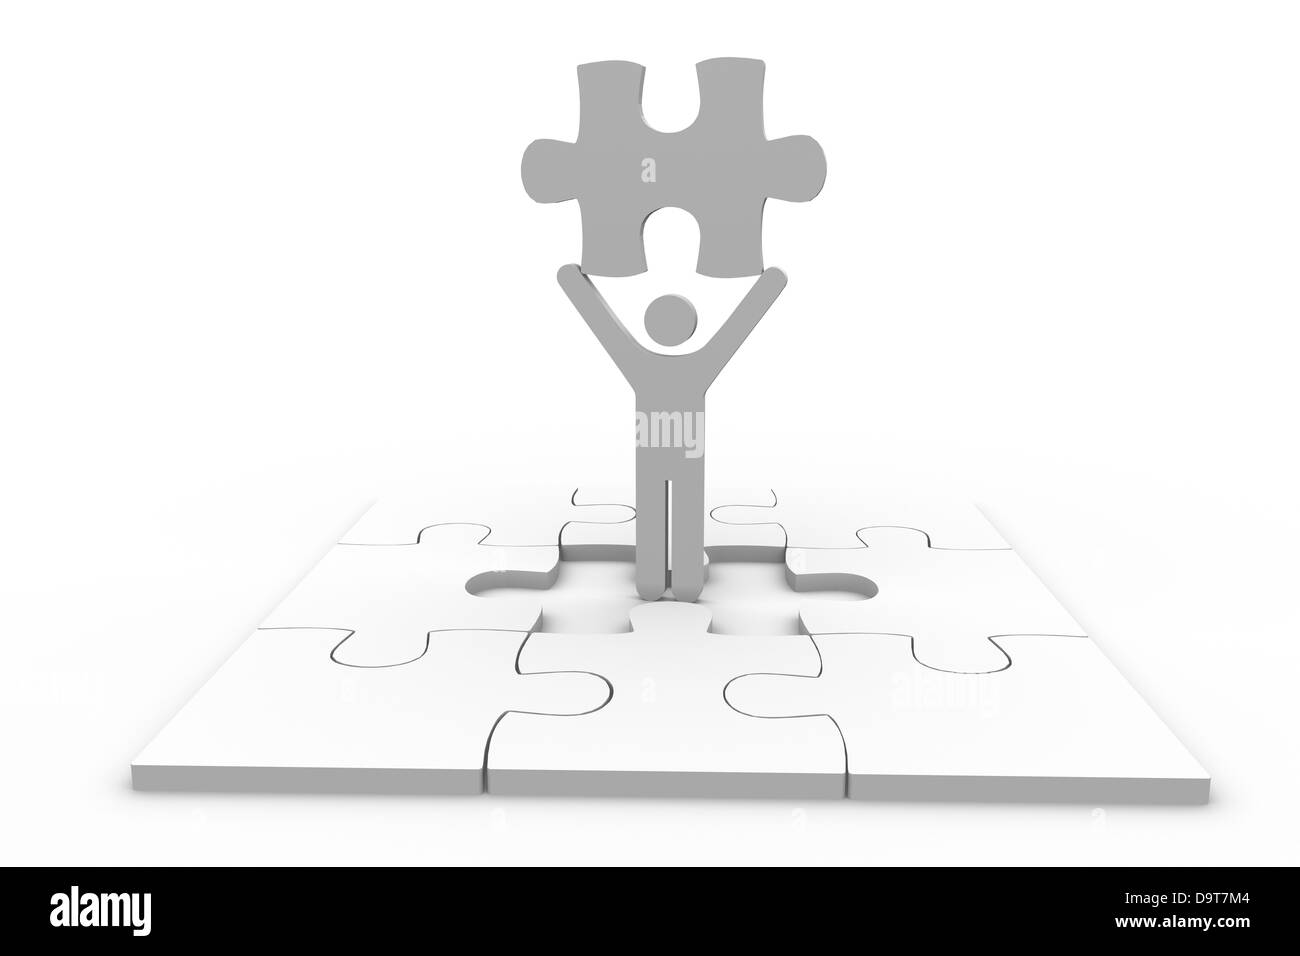 Human representation holding jigsaw piece over unfinished puzzle Stock Photo